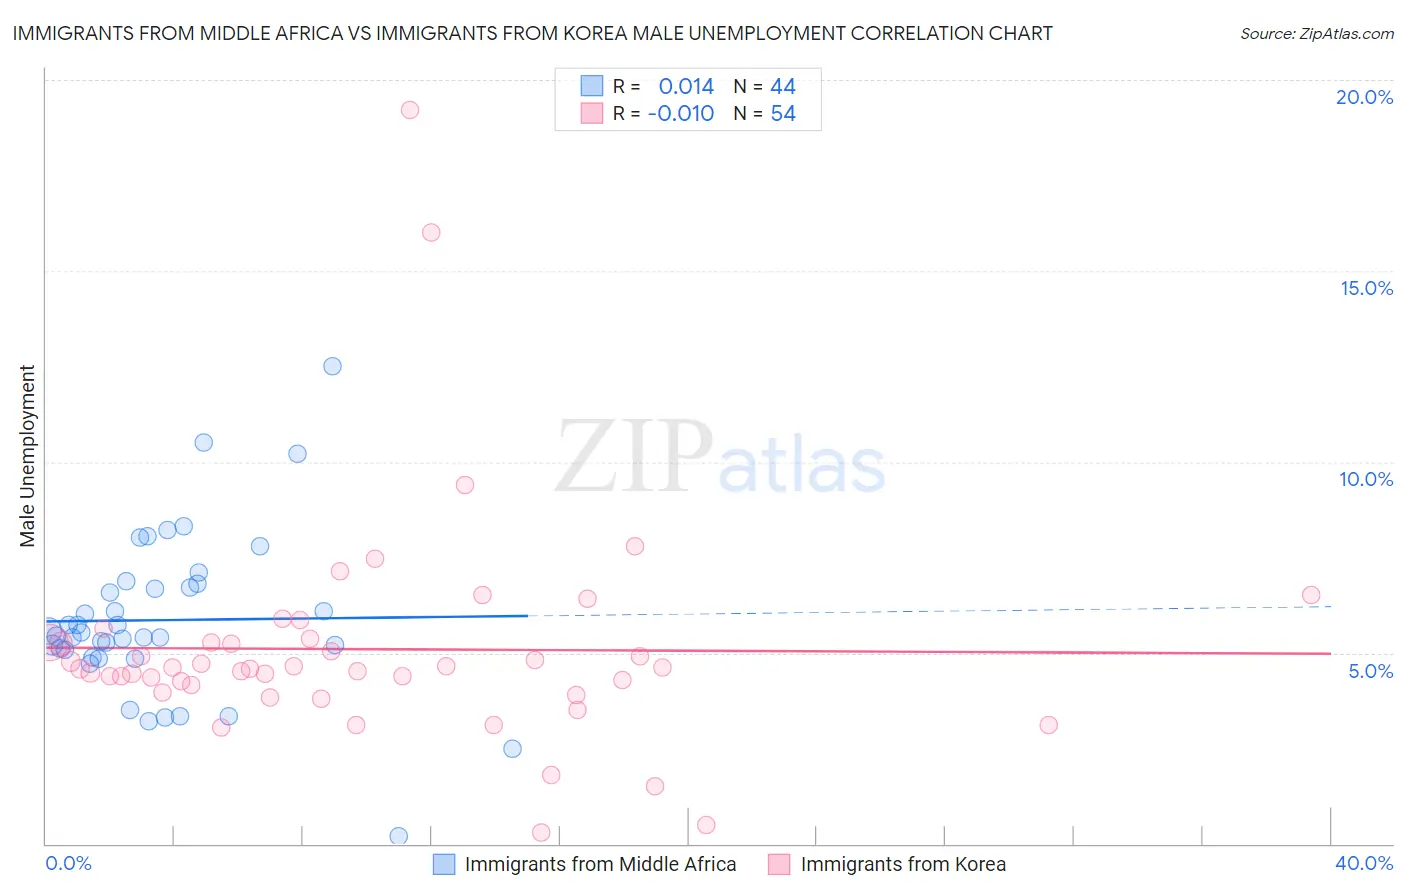 Immigrants from Middle Africa vs Immigrants from Korea Male Unemployment